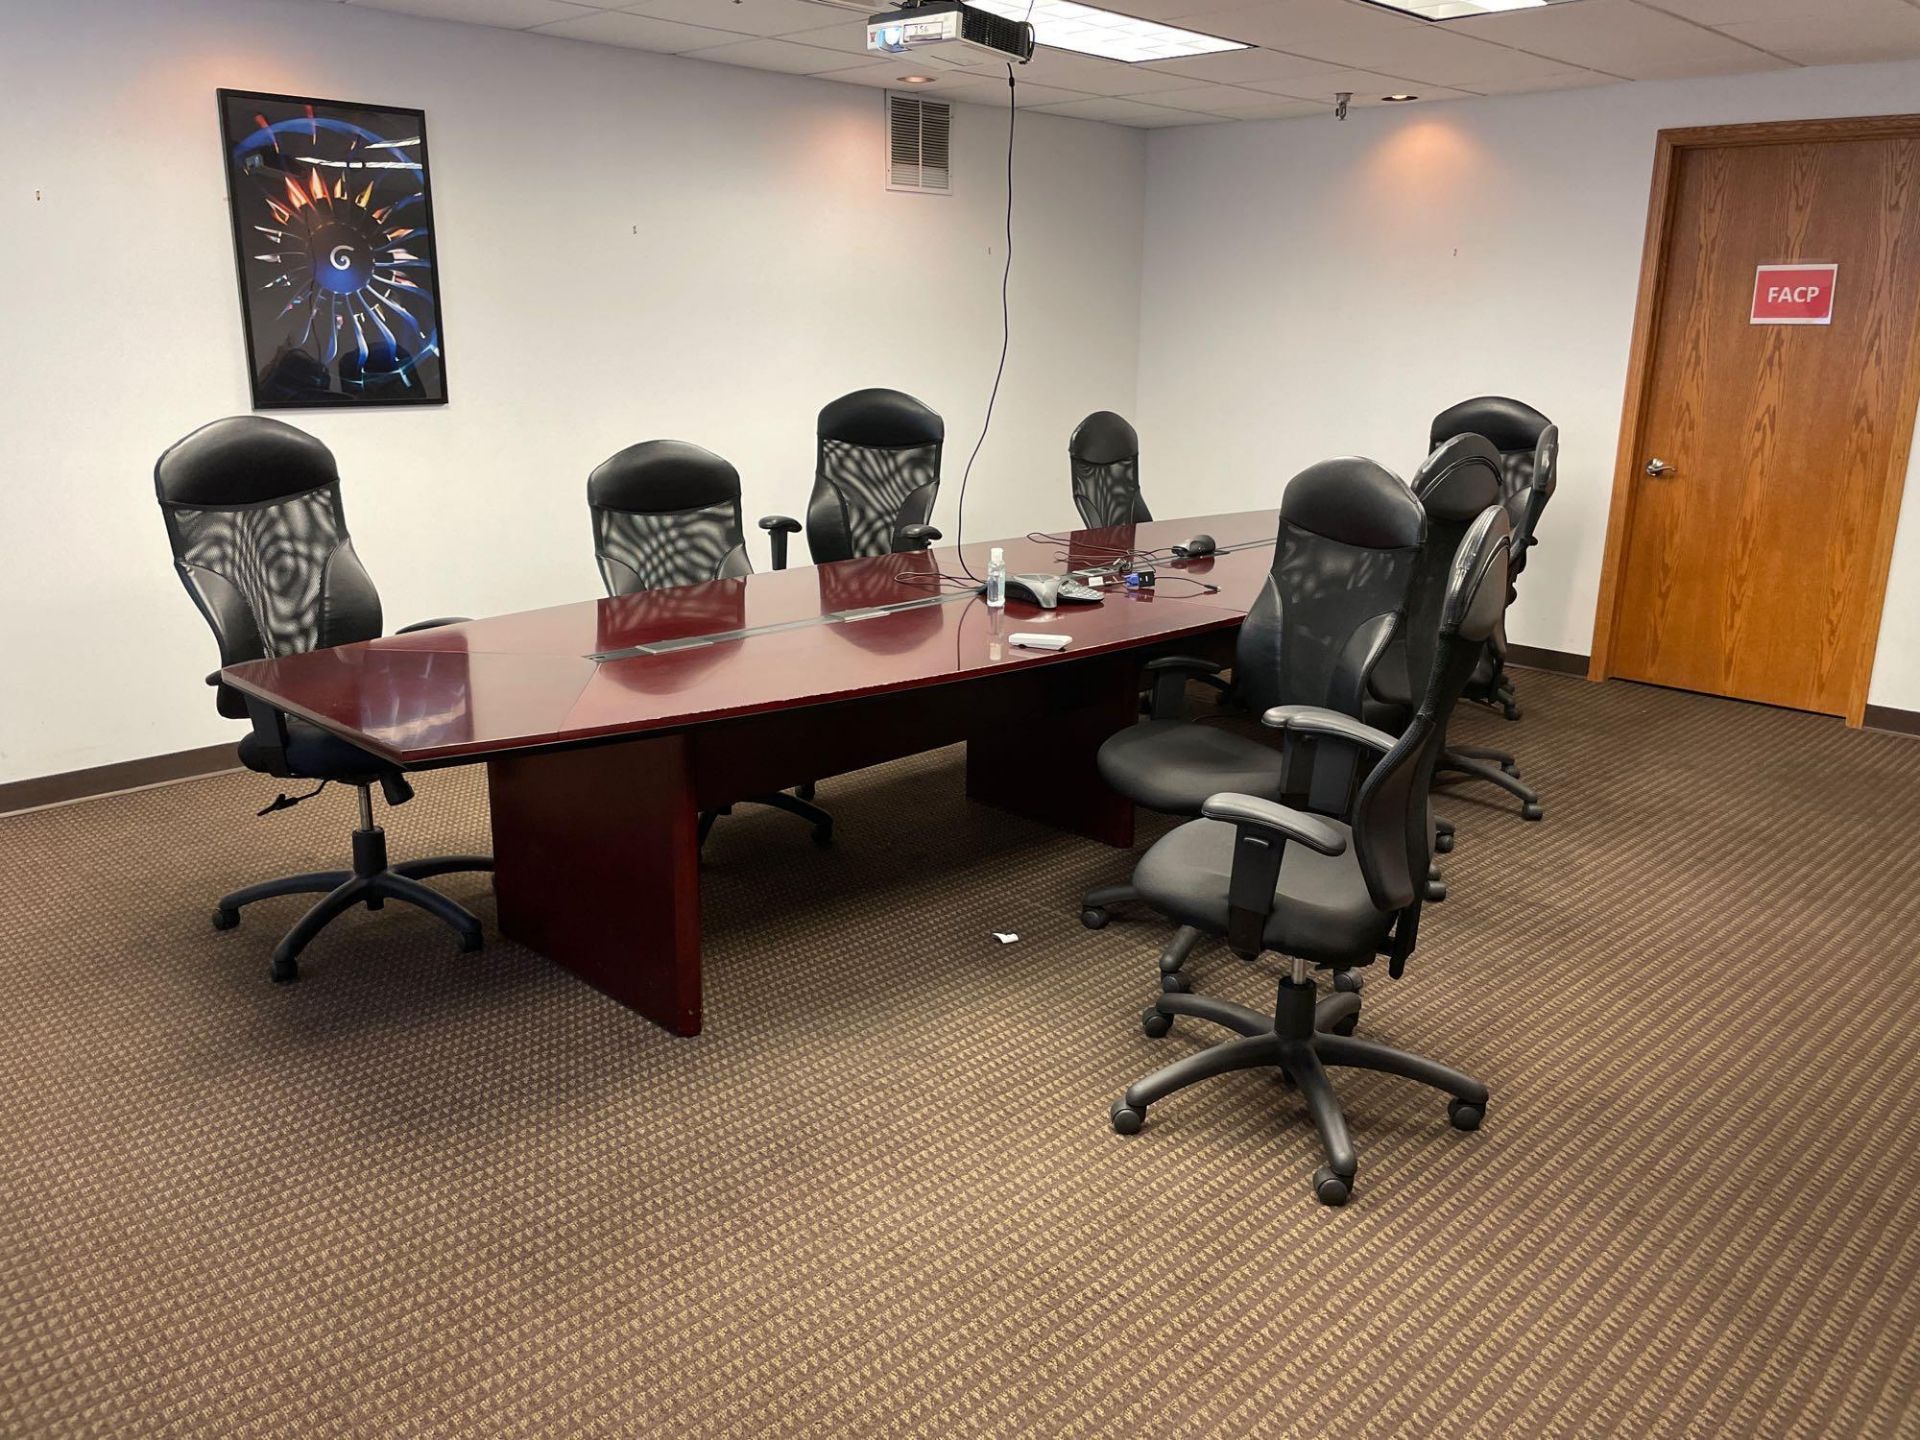 Conference Table w/ Chairs & Cabinet